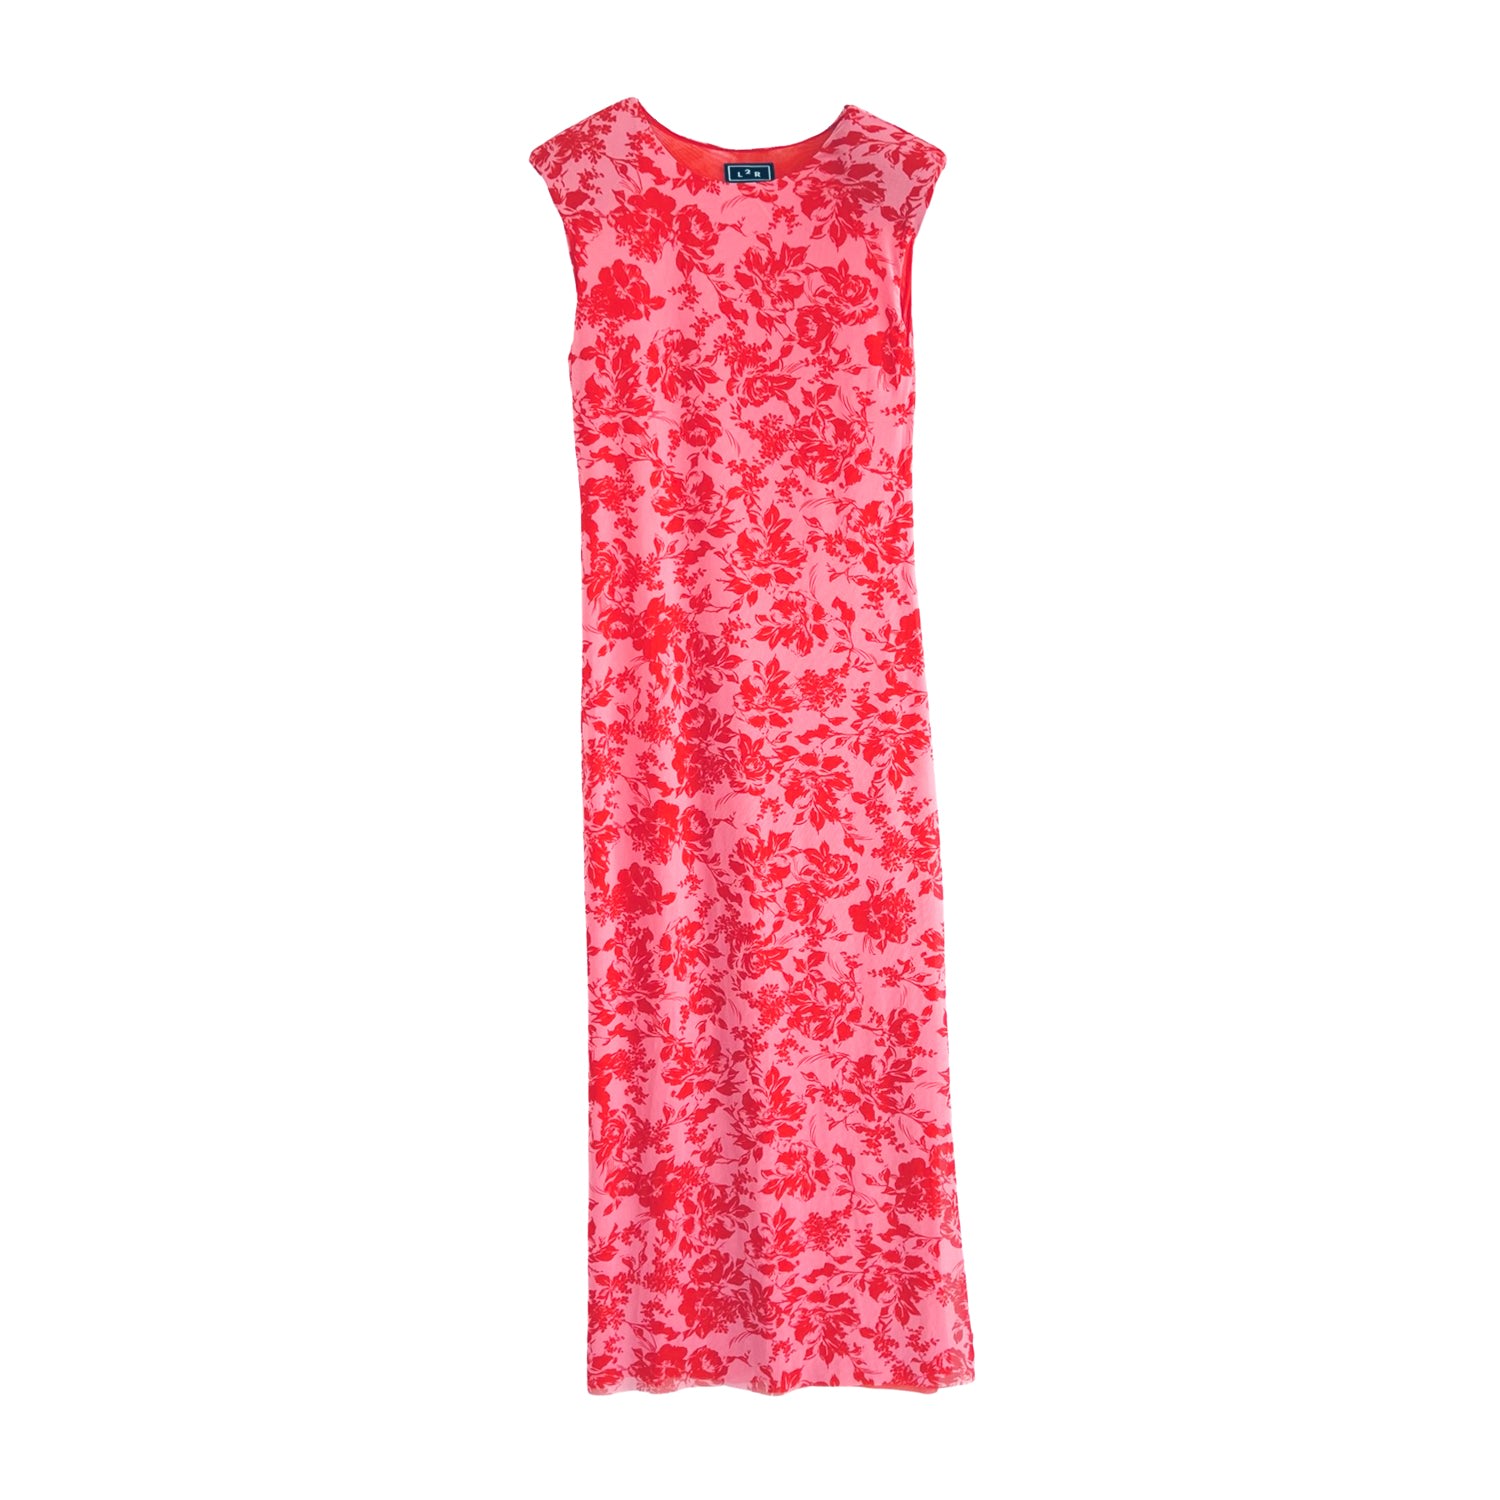 L2r The Label Women's Shoulder Pad Printed Mesh Dress In Red